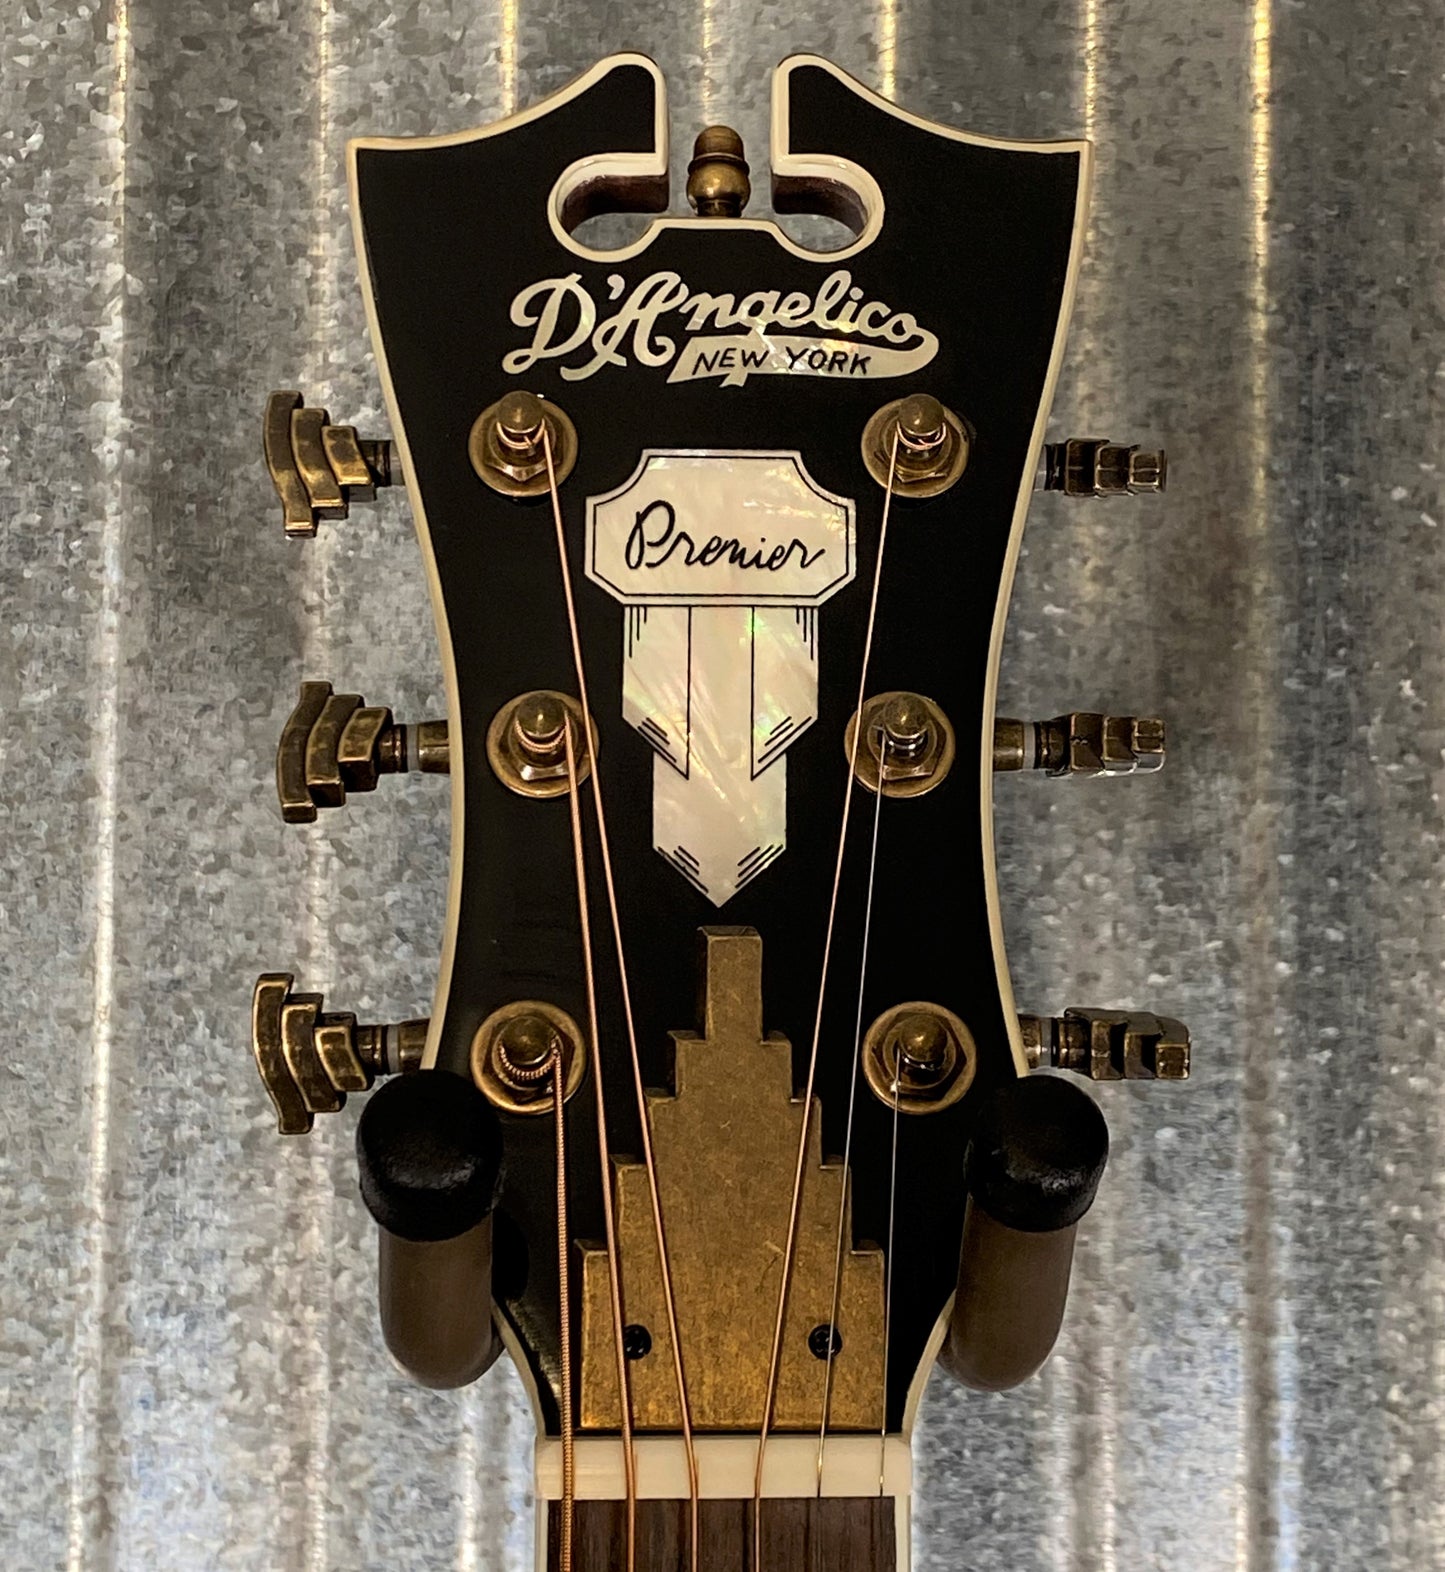 D'Angelico Premier Tammany Orchestra E Vintage Natural Acoustic Electric Guitar #8639